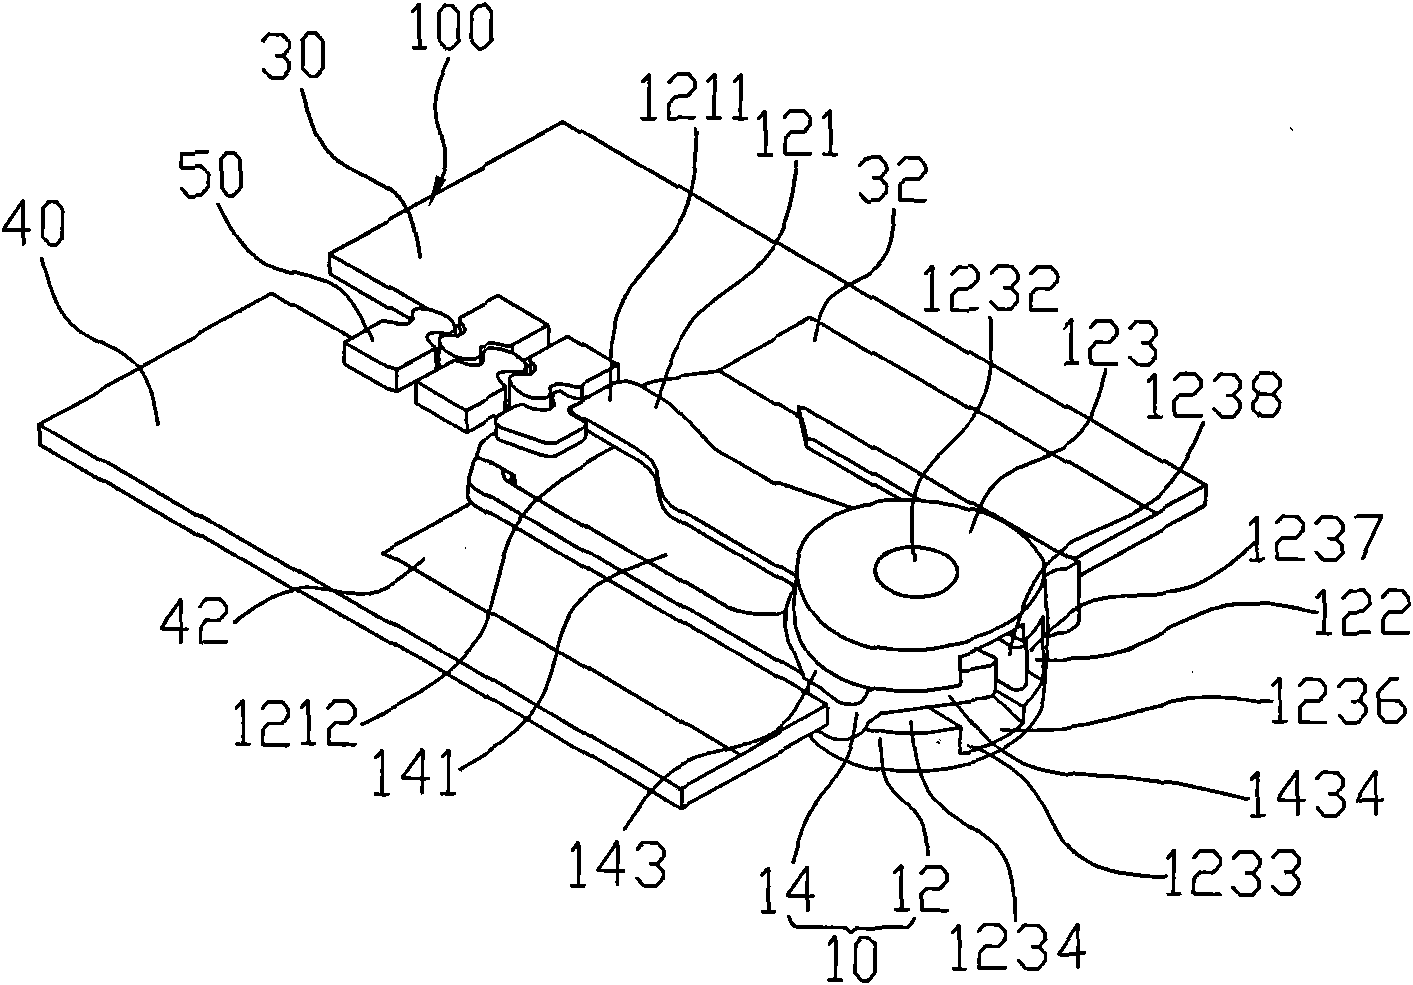 Lower stop for closed-end zipper and closed-end zipper using same